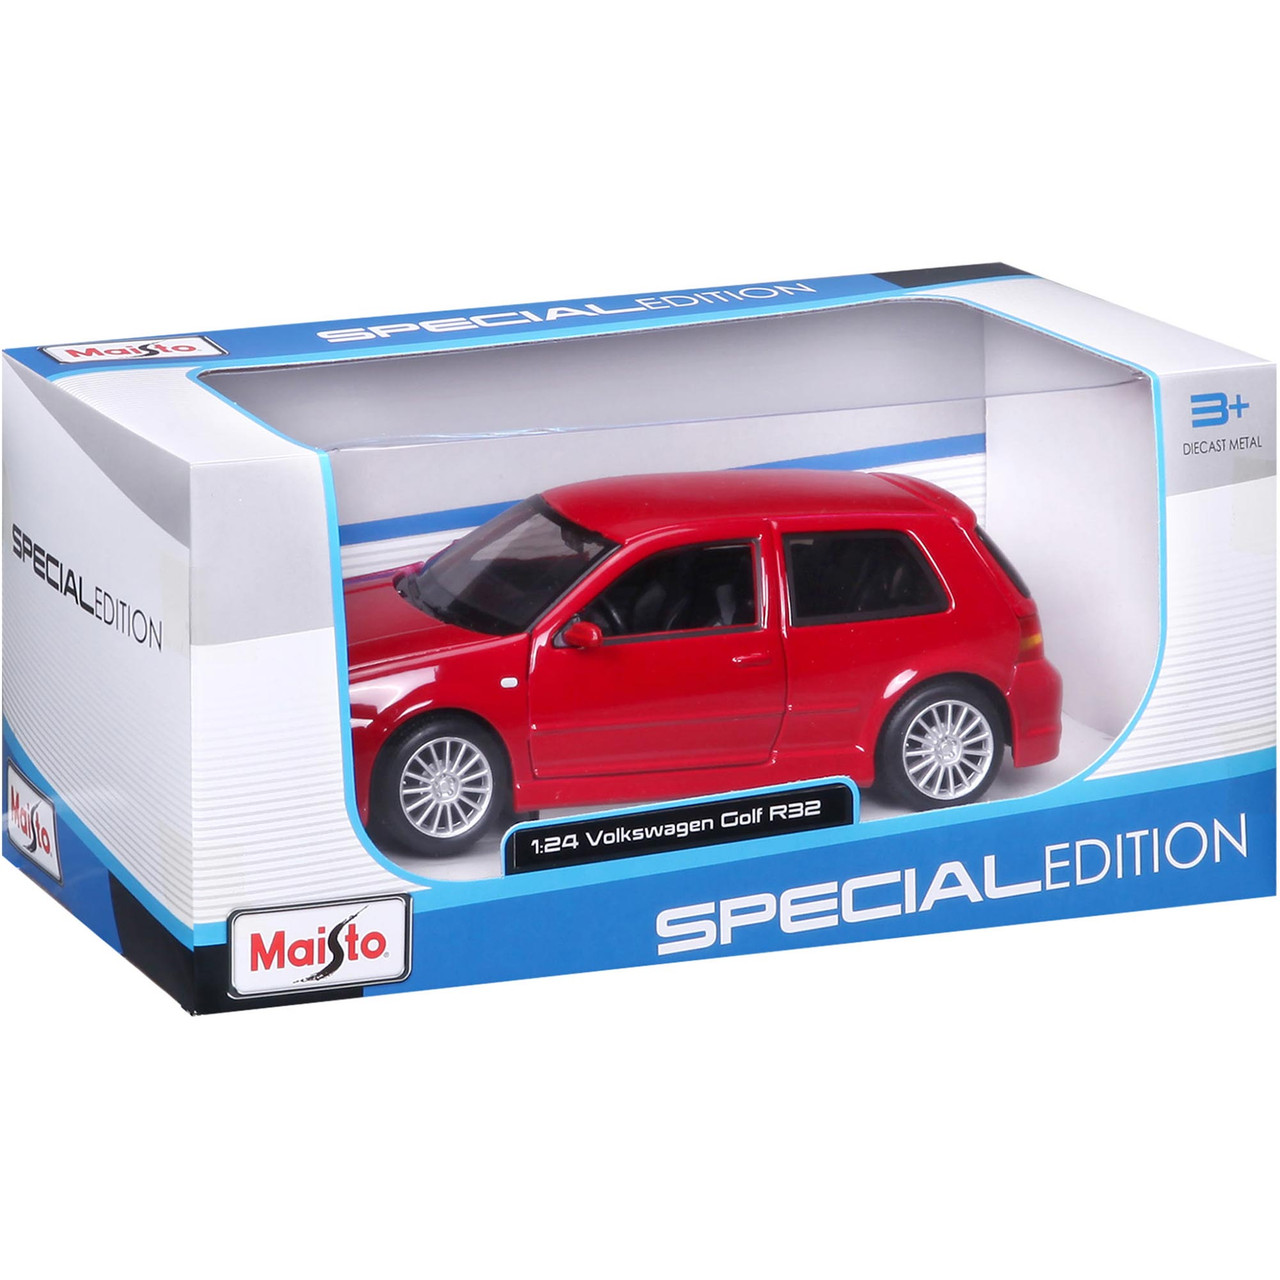 VW Golf R32 - red 1:24 Scale Diecast Model by Maisto | Fairfield Collectibles - The #1 Source For High Quality Diecast Model Cars